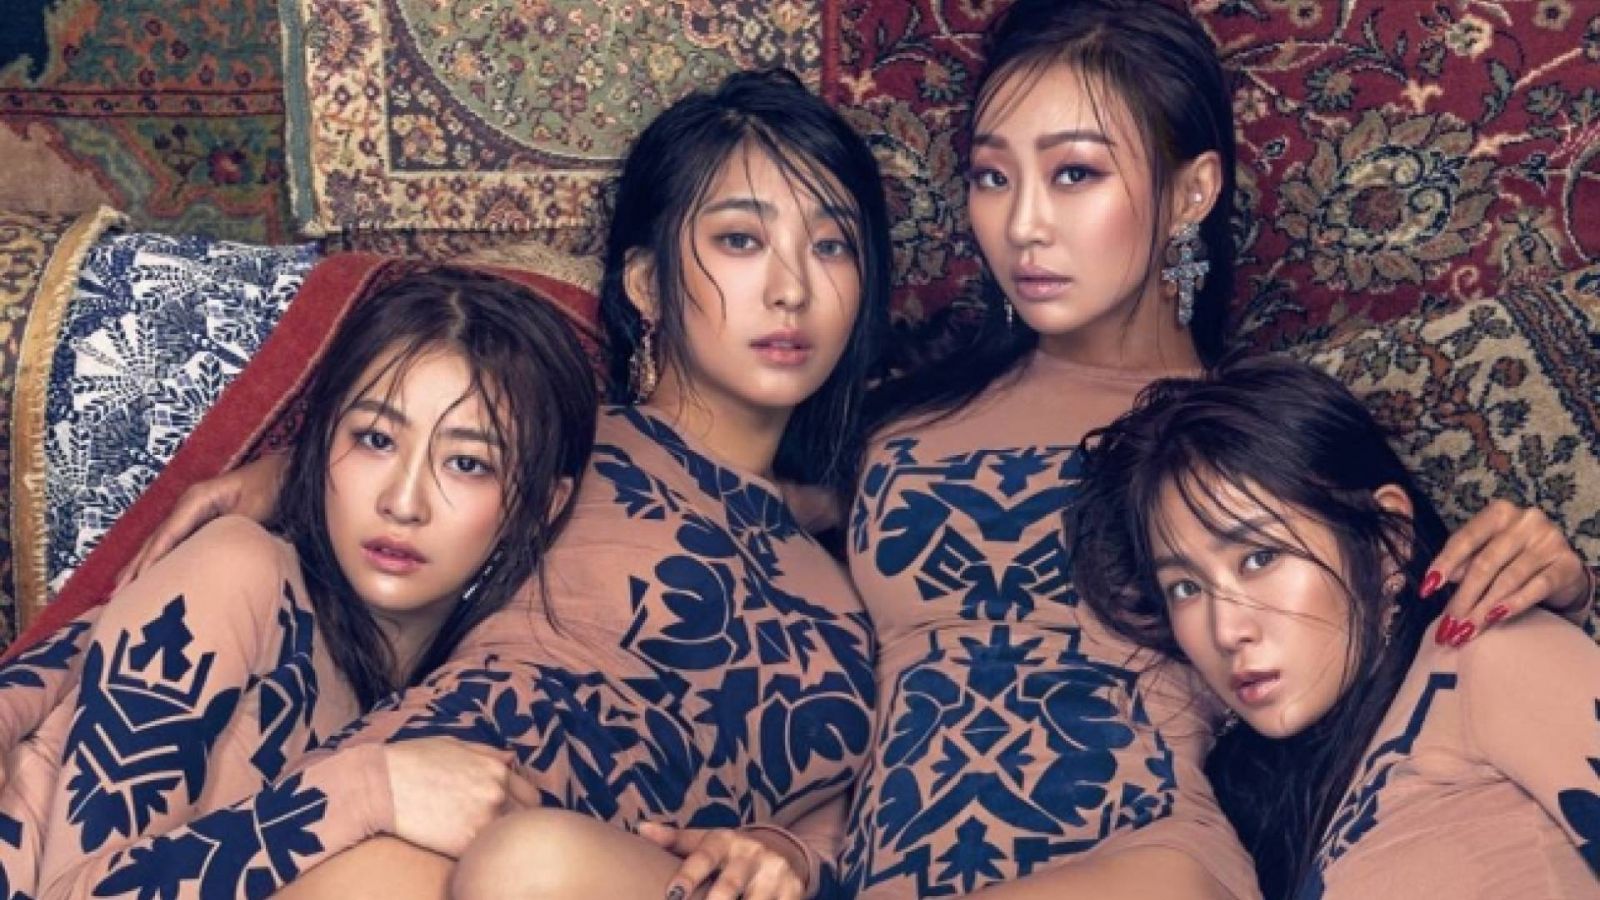 Sistar Confirms Rumours of Disbandment © Sistar. All Rights Reserved.